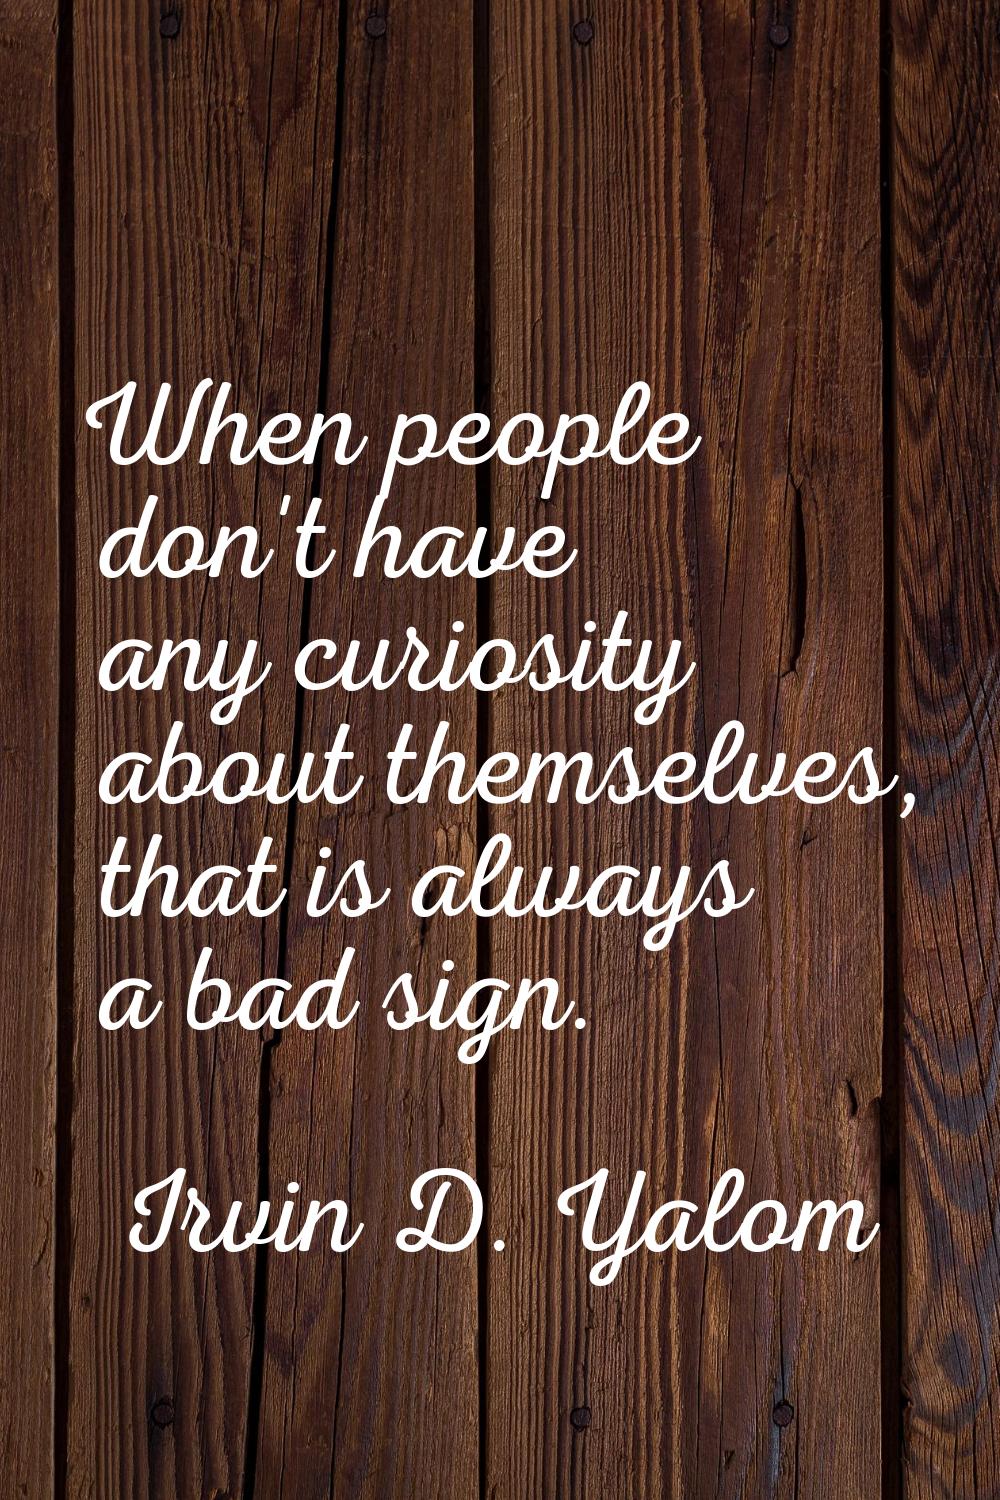 When people don't have any curiosity about themselves, that is always a bad sign.